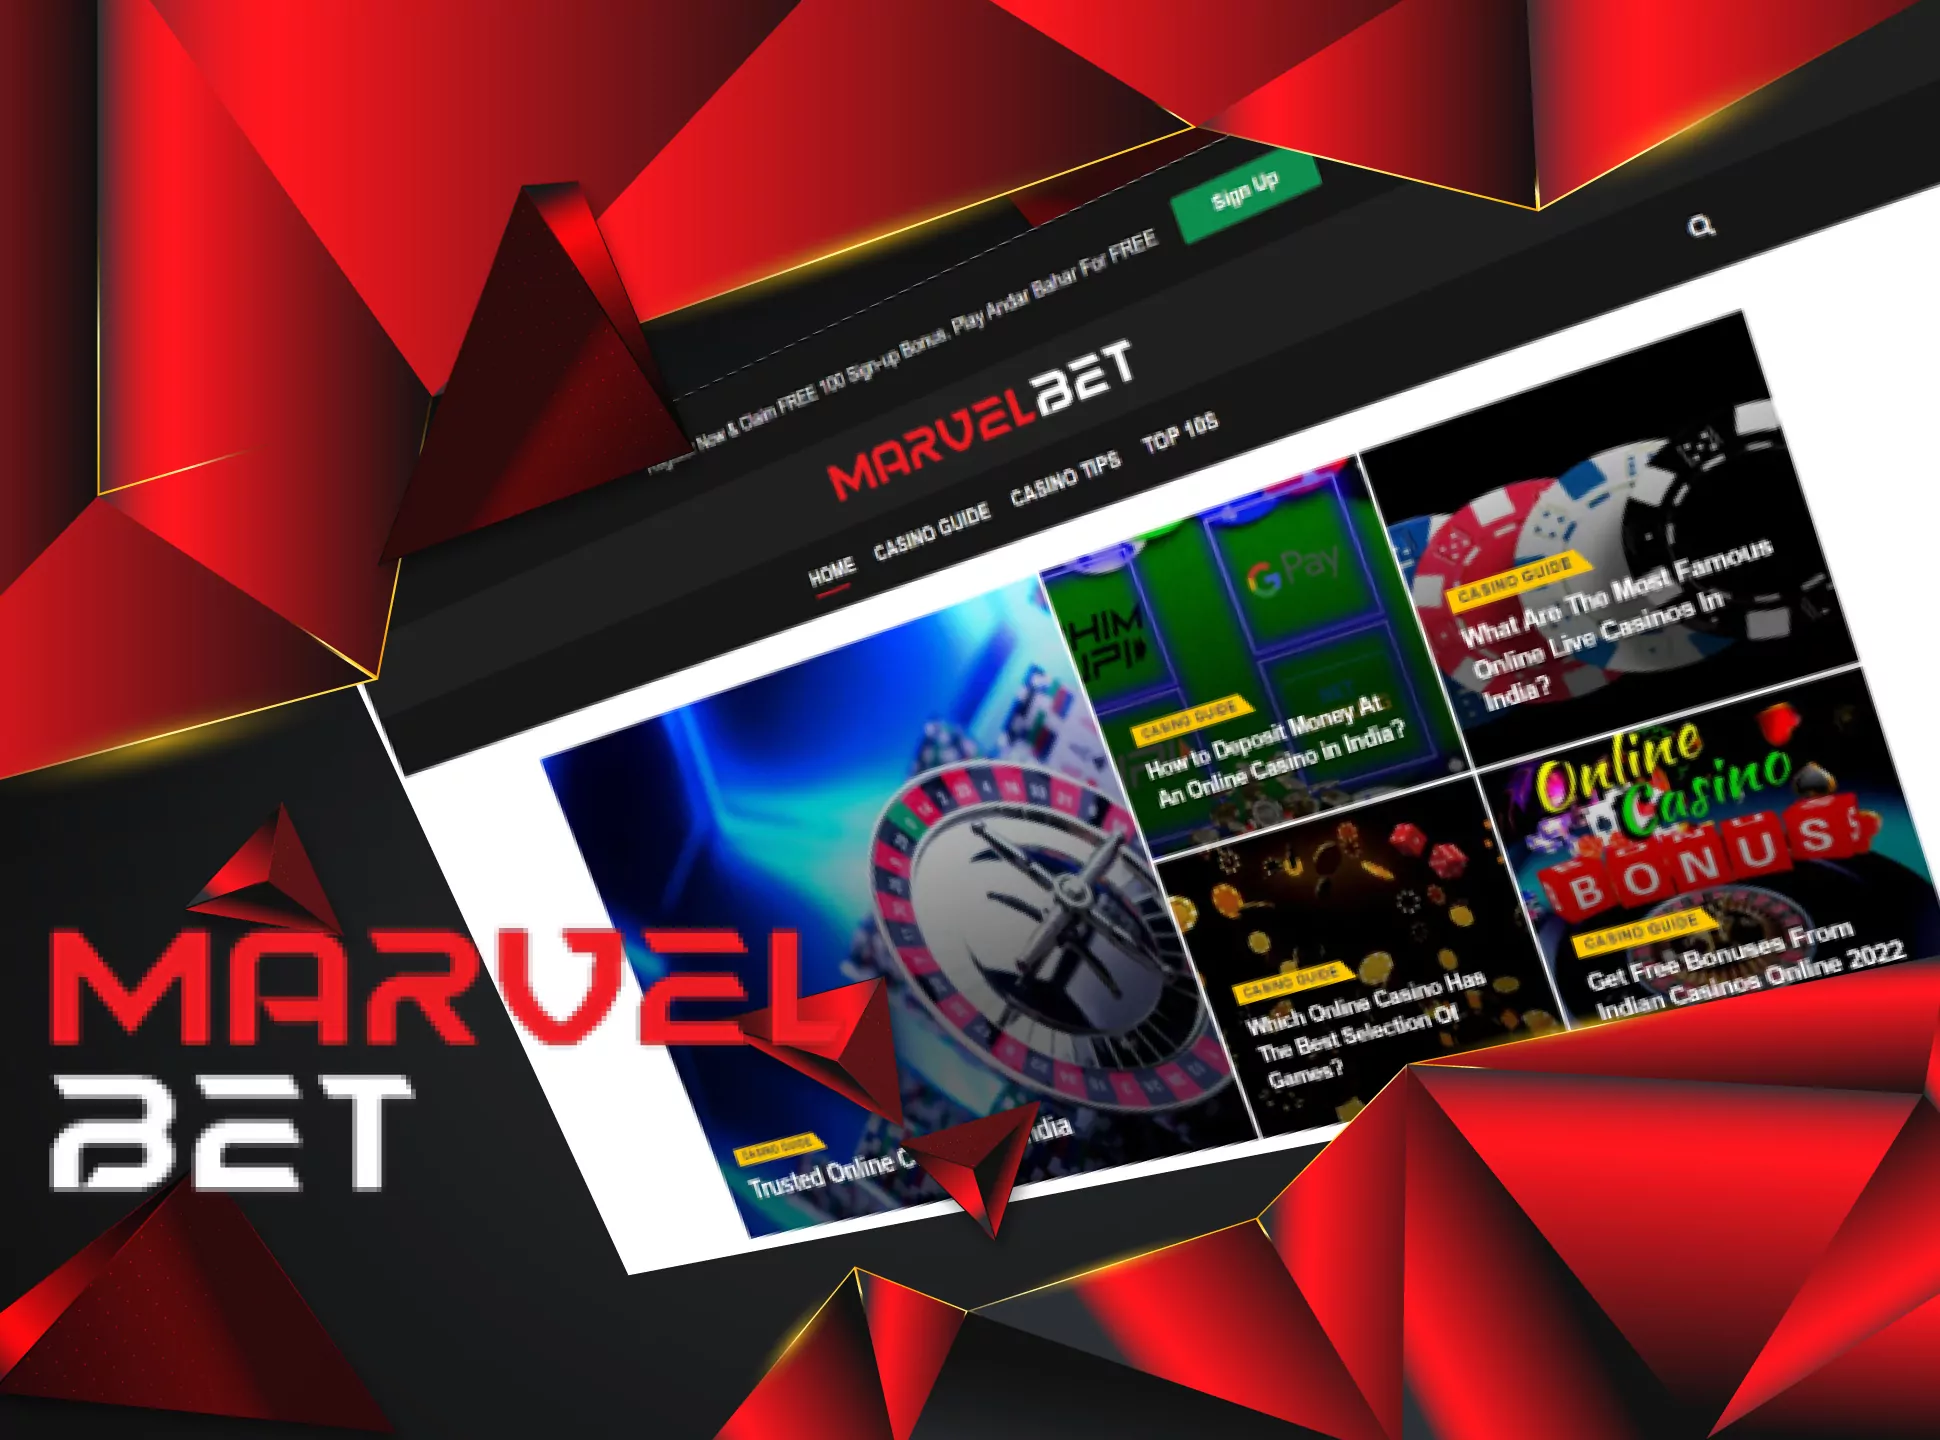 Marvelbet has its own blog to get more information about the company and betting trends.